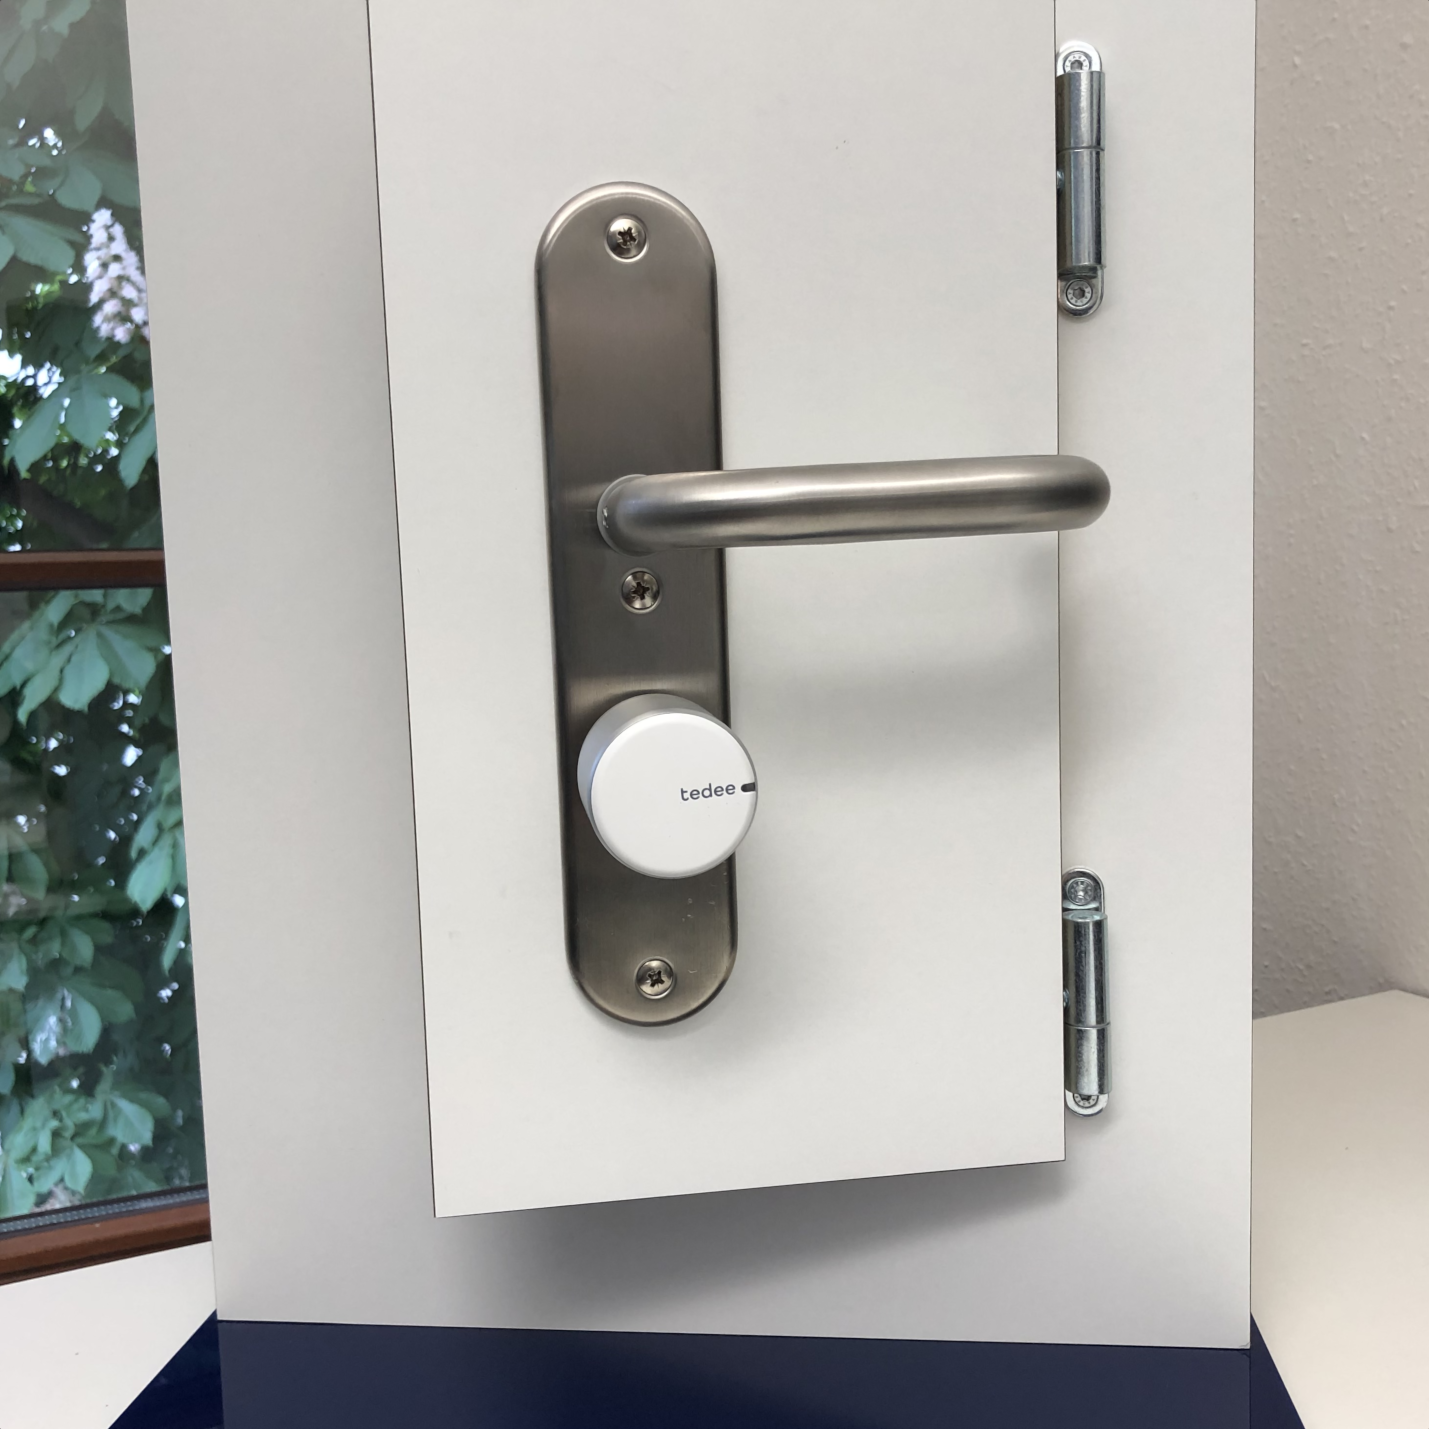 Recertified for the 3rd time! The smart tedee system: tedee Lock